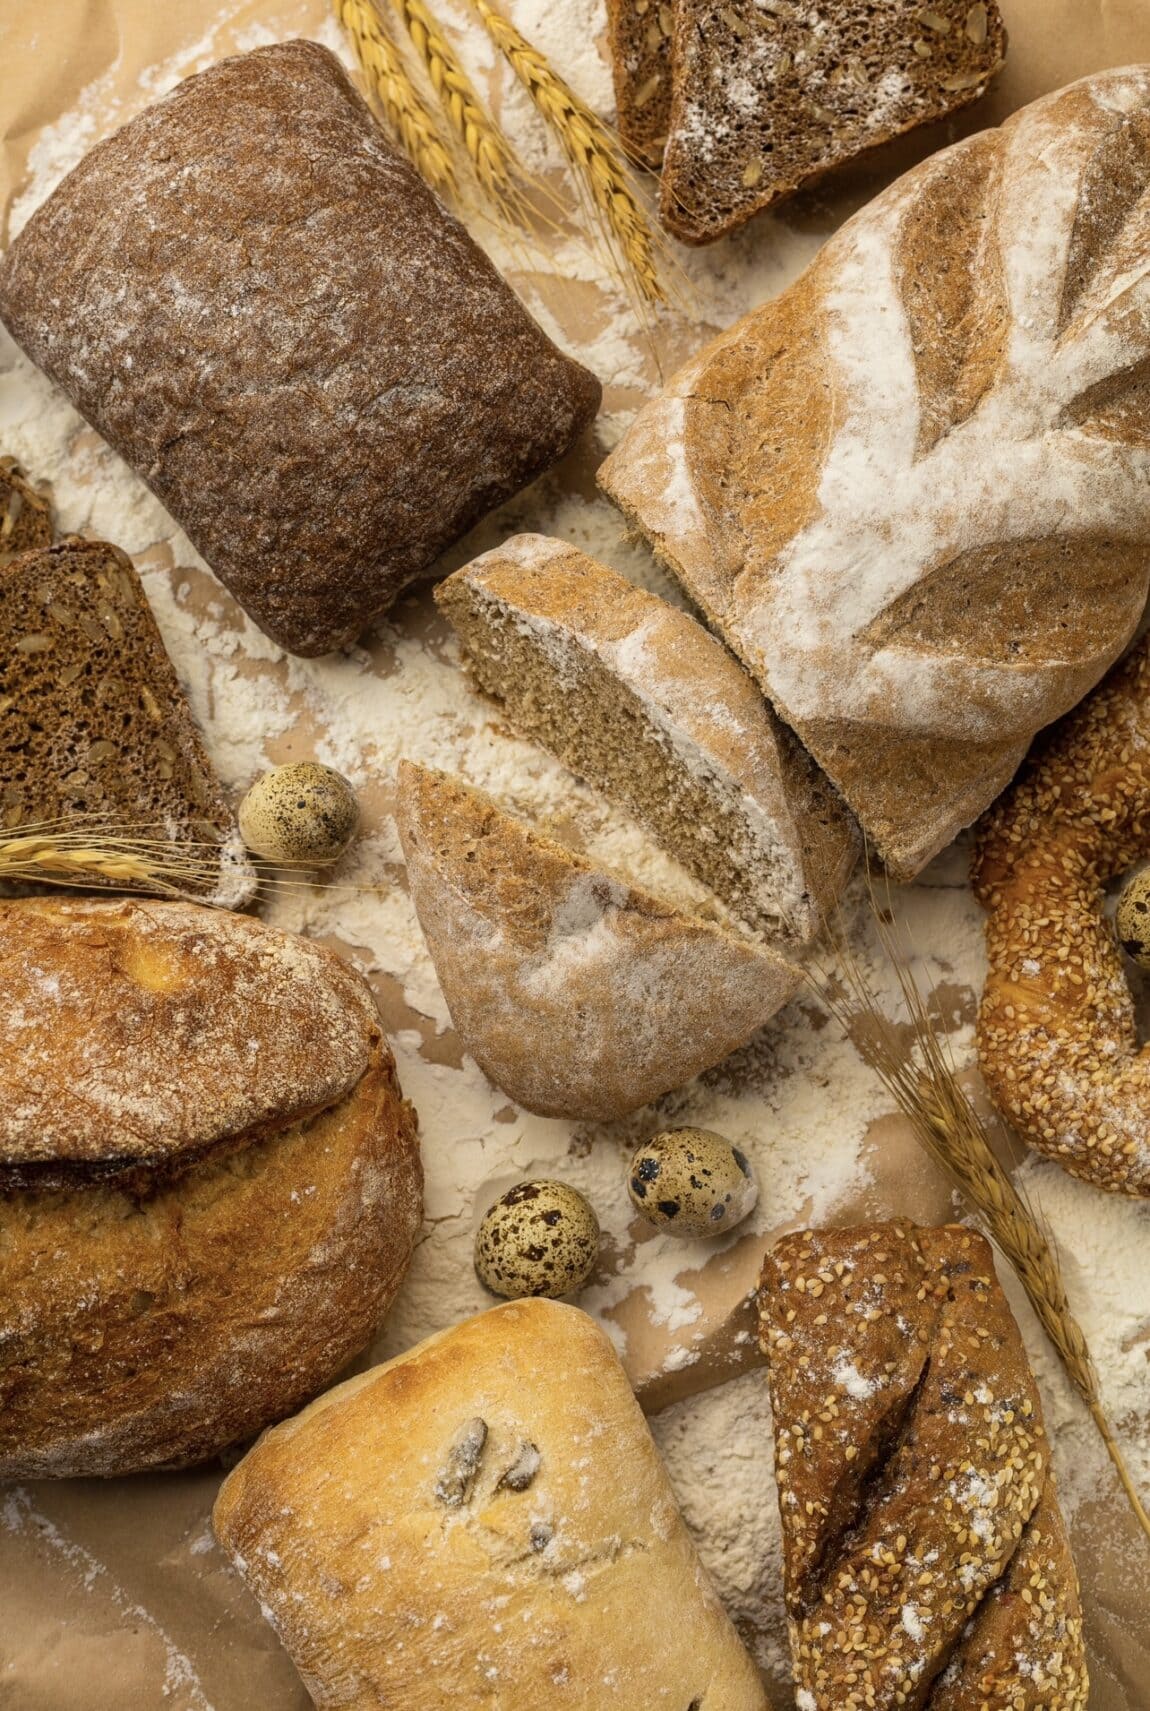 Gluten And Hashimoto's - What Are The Effects Of Gluten?